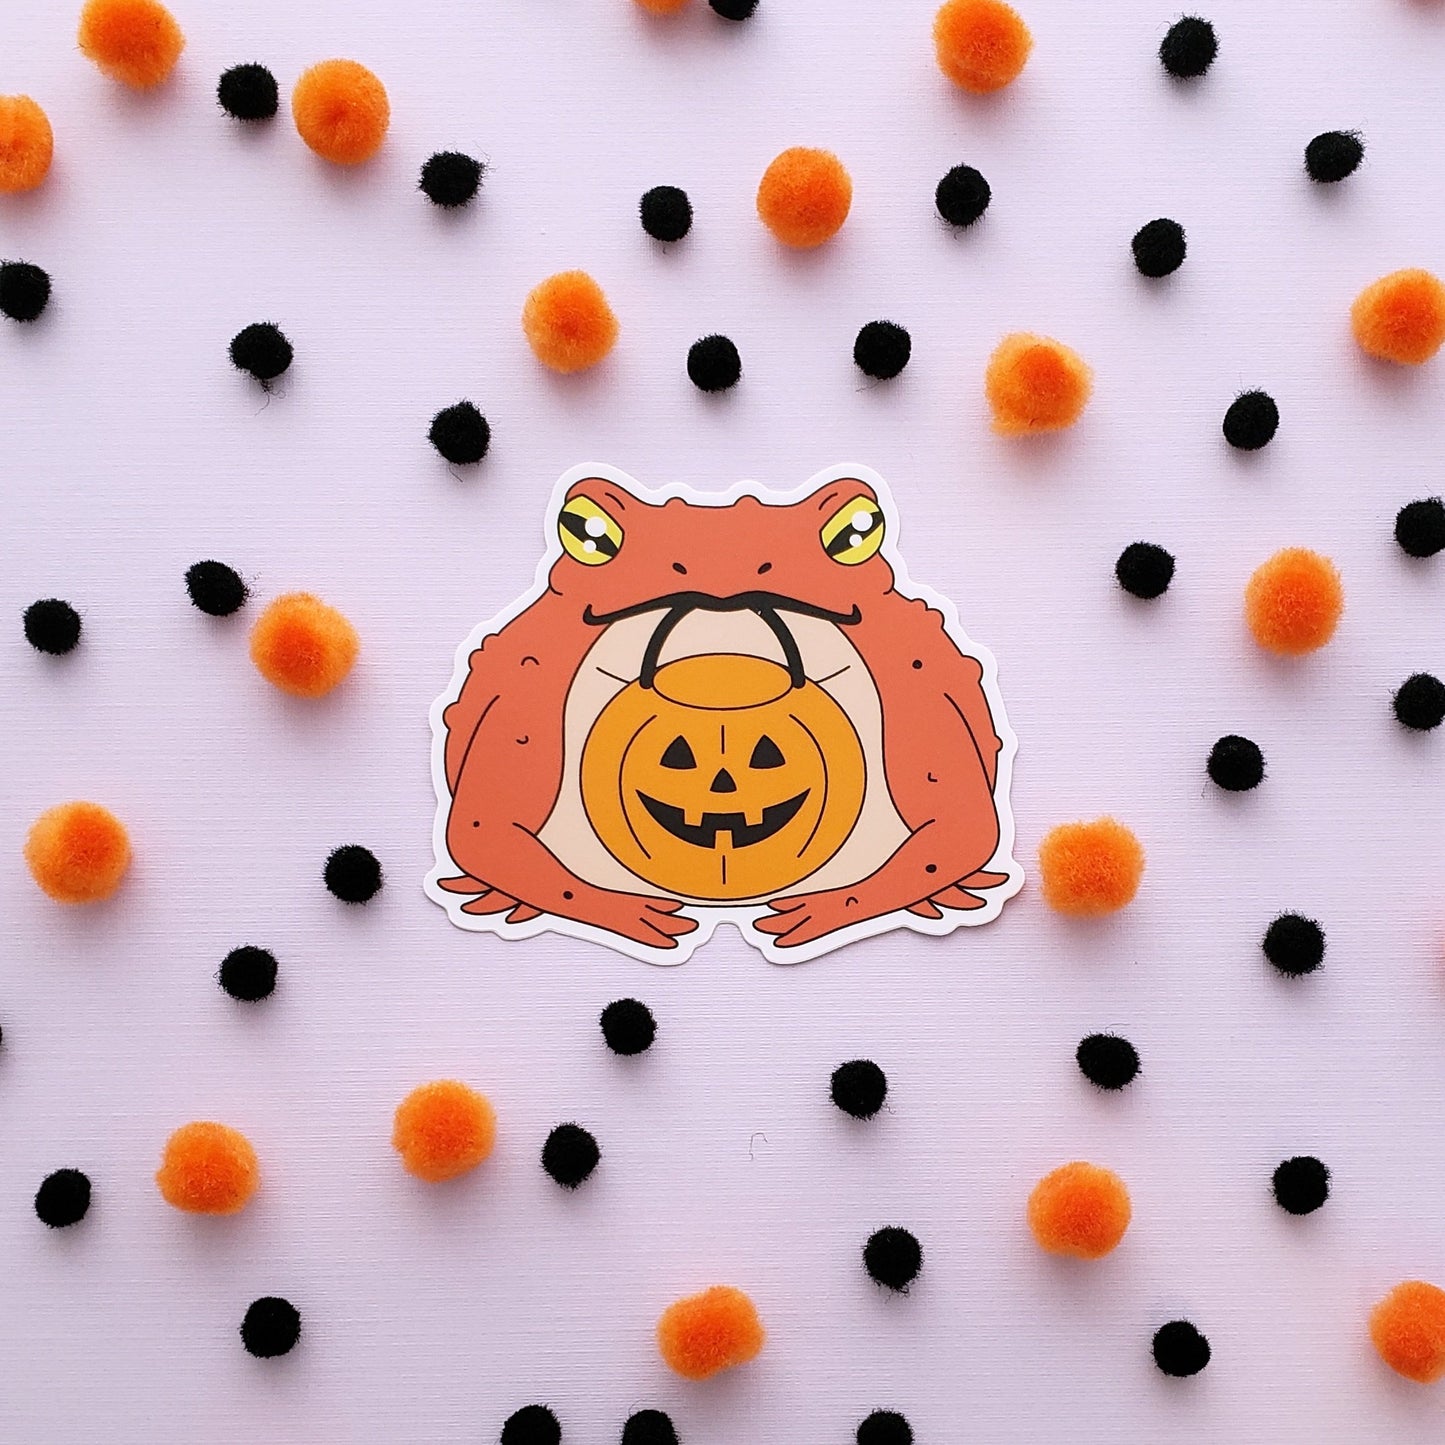 Trick-or-Treat Toad sticker